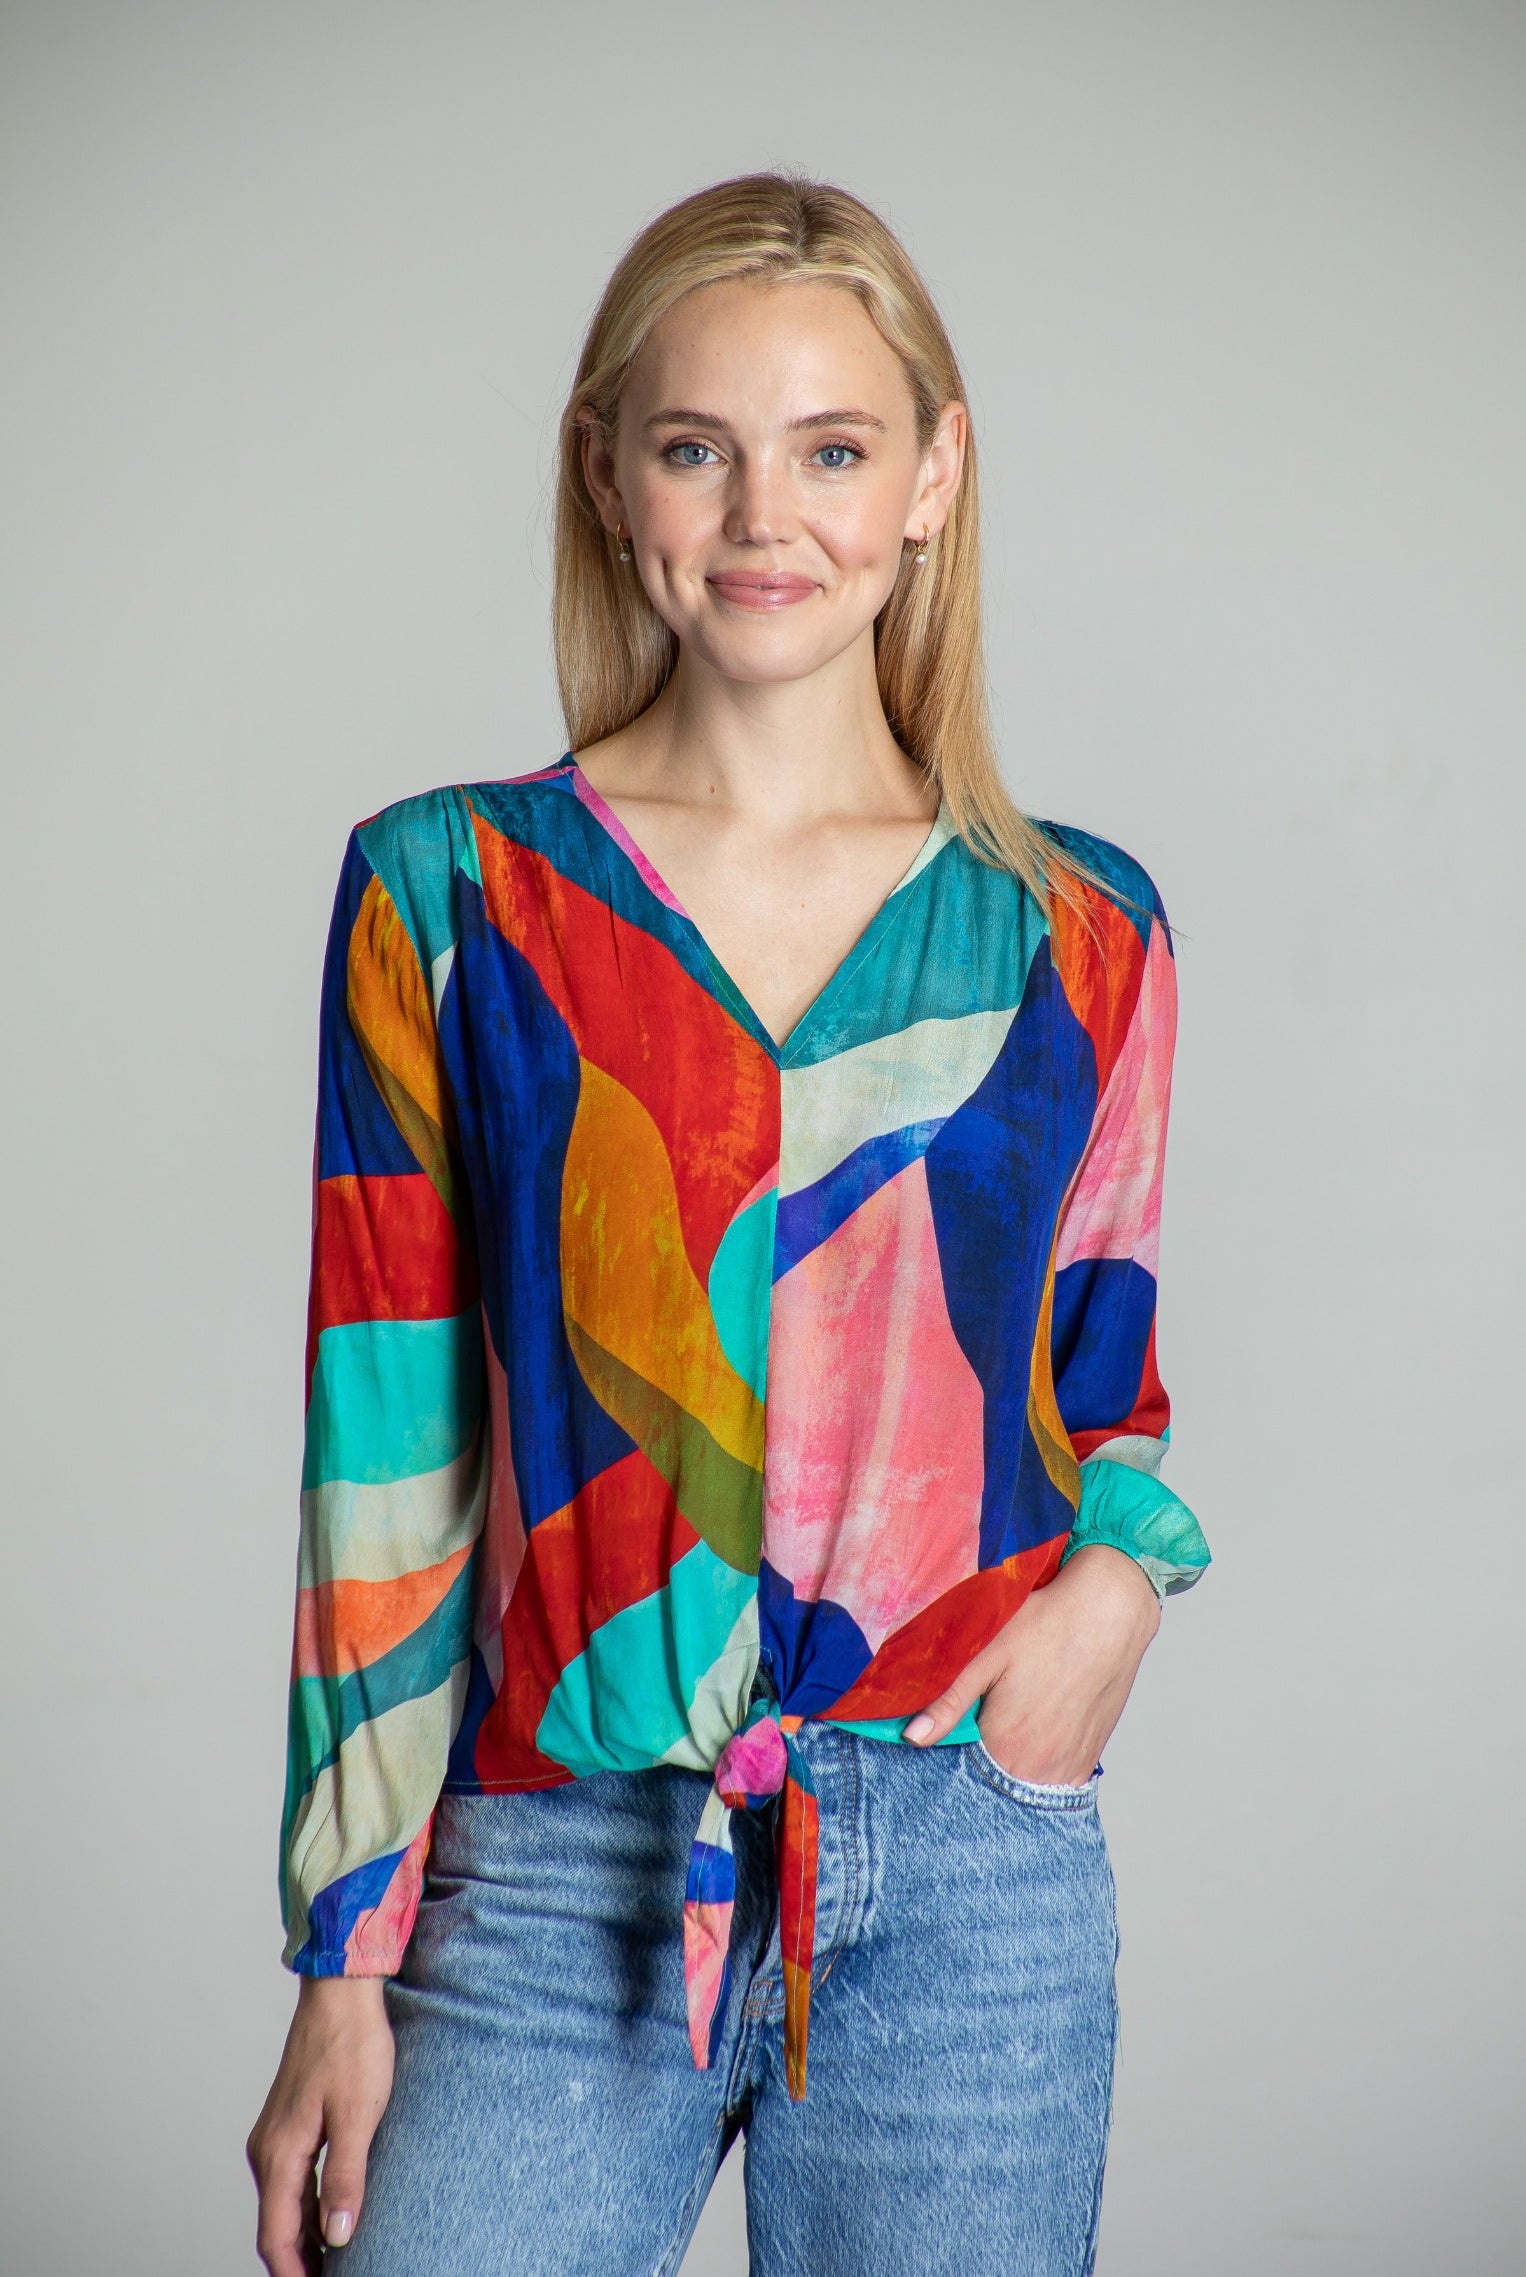 Fancy Blouses and Tops - Jeans with Tops For Ladies